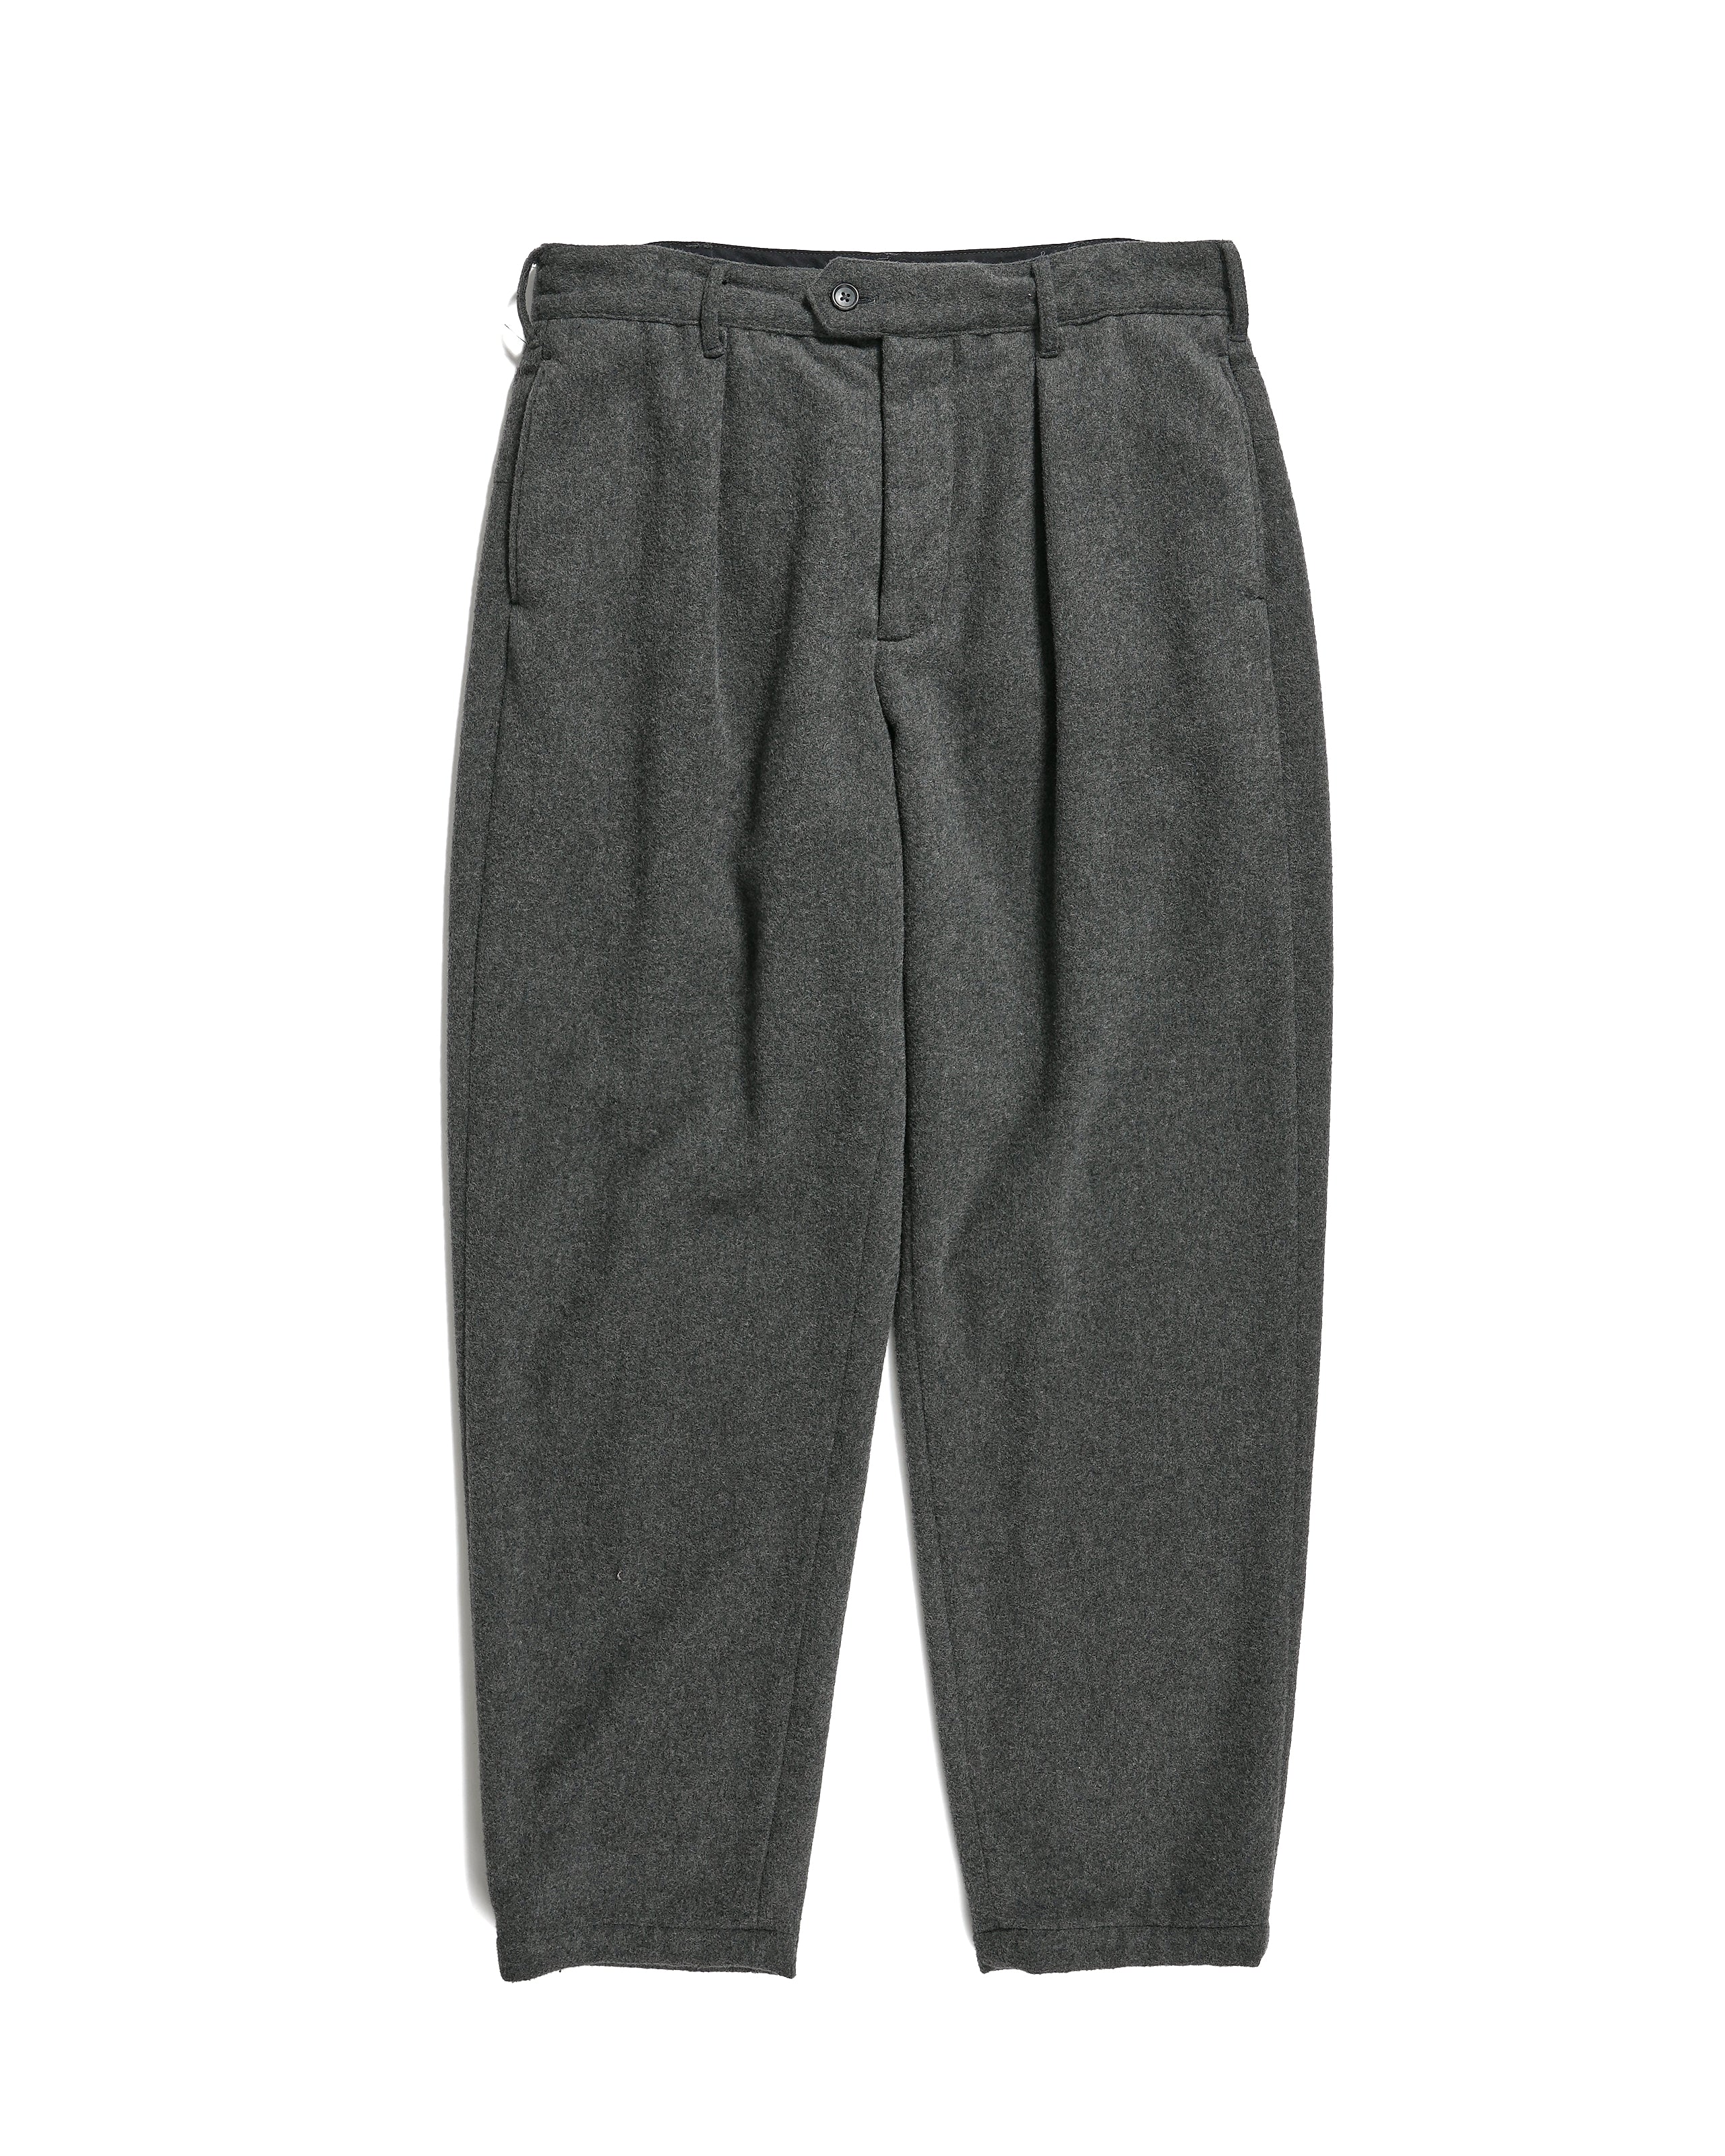 Carlyle Pant - Grey Wool Polyester Heavy Flannel | Nepenthes New York